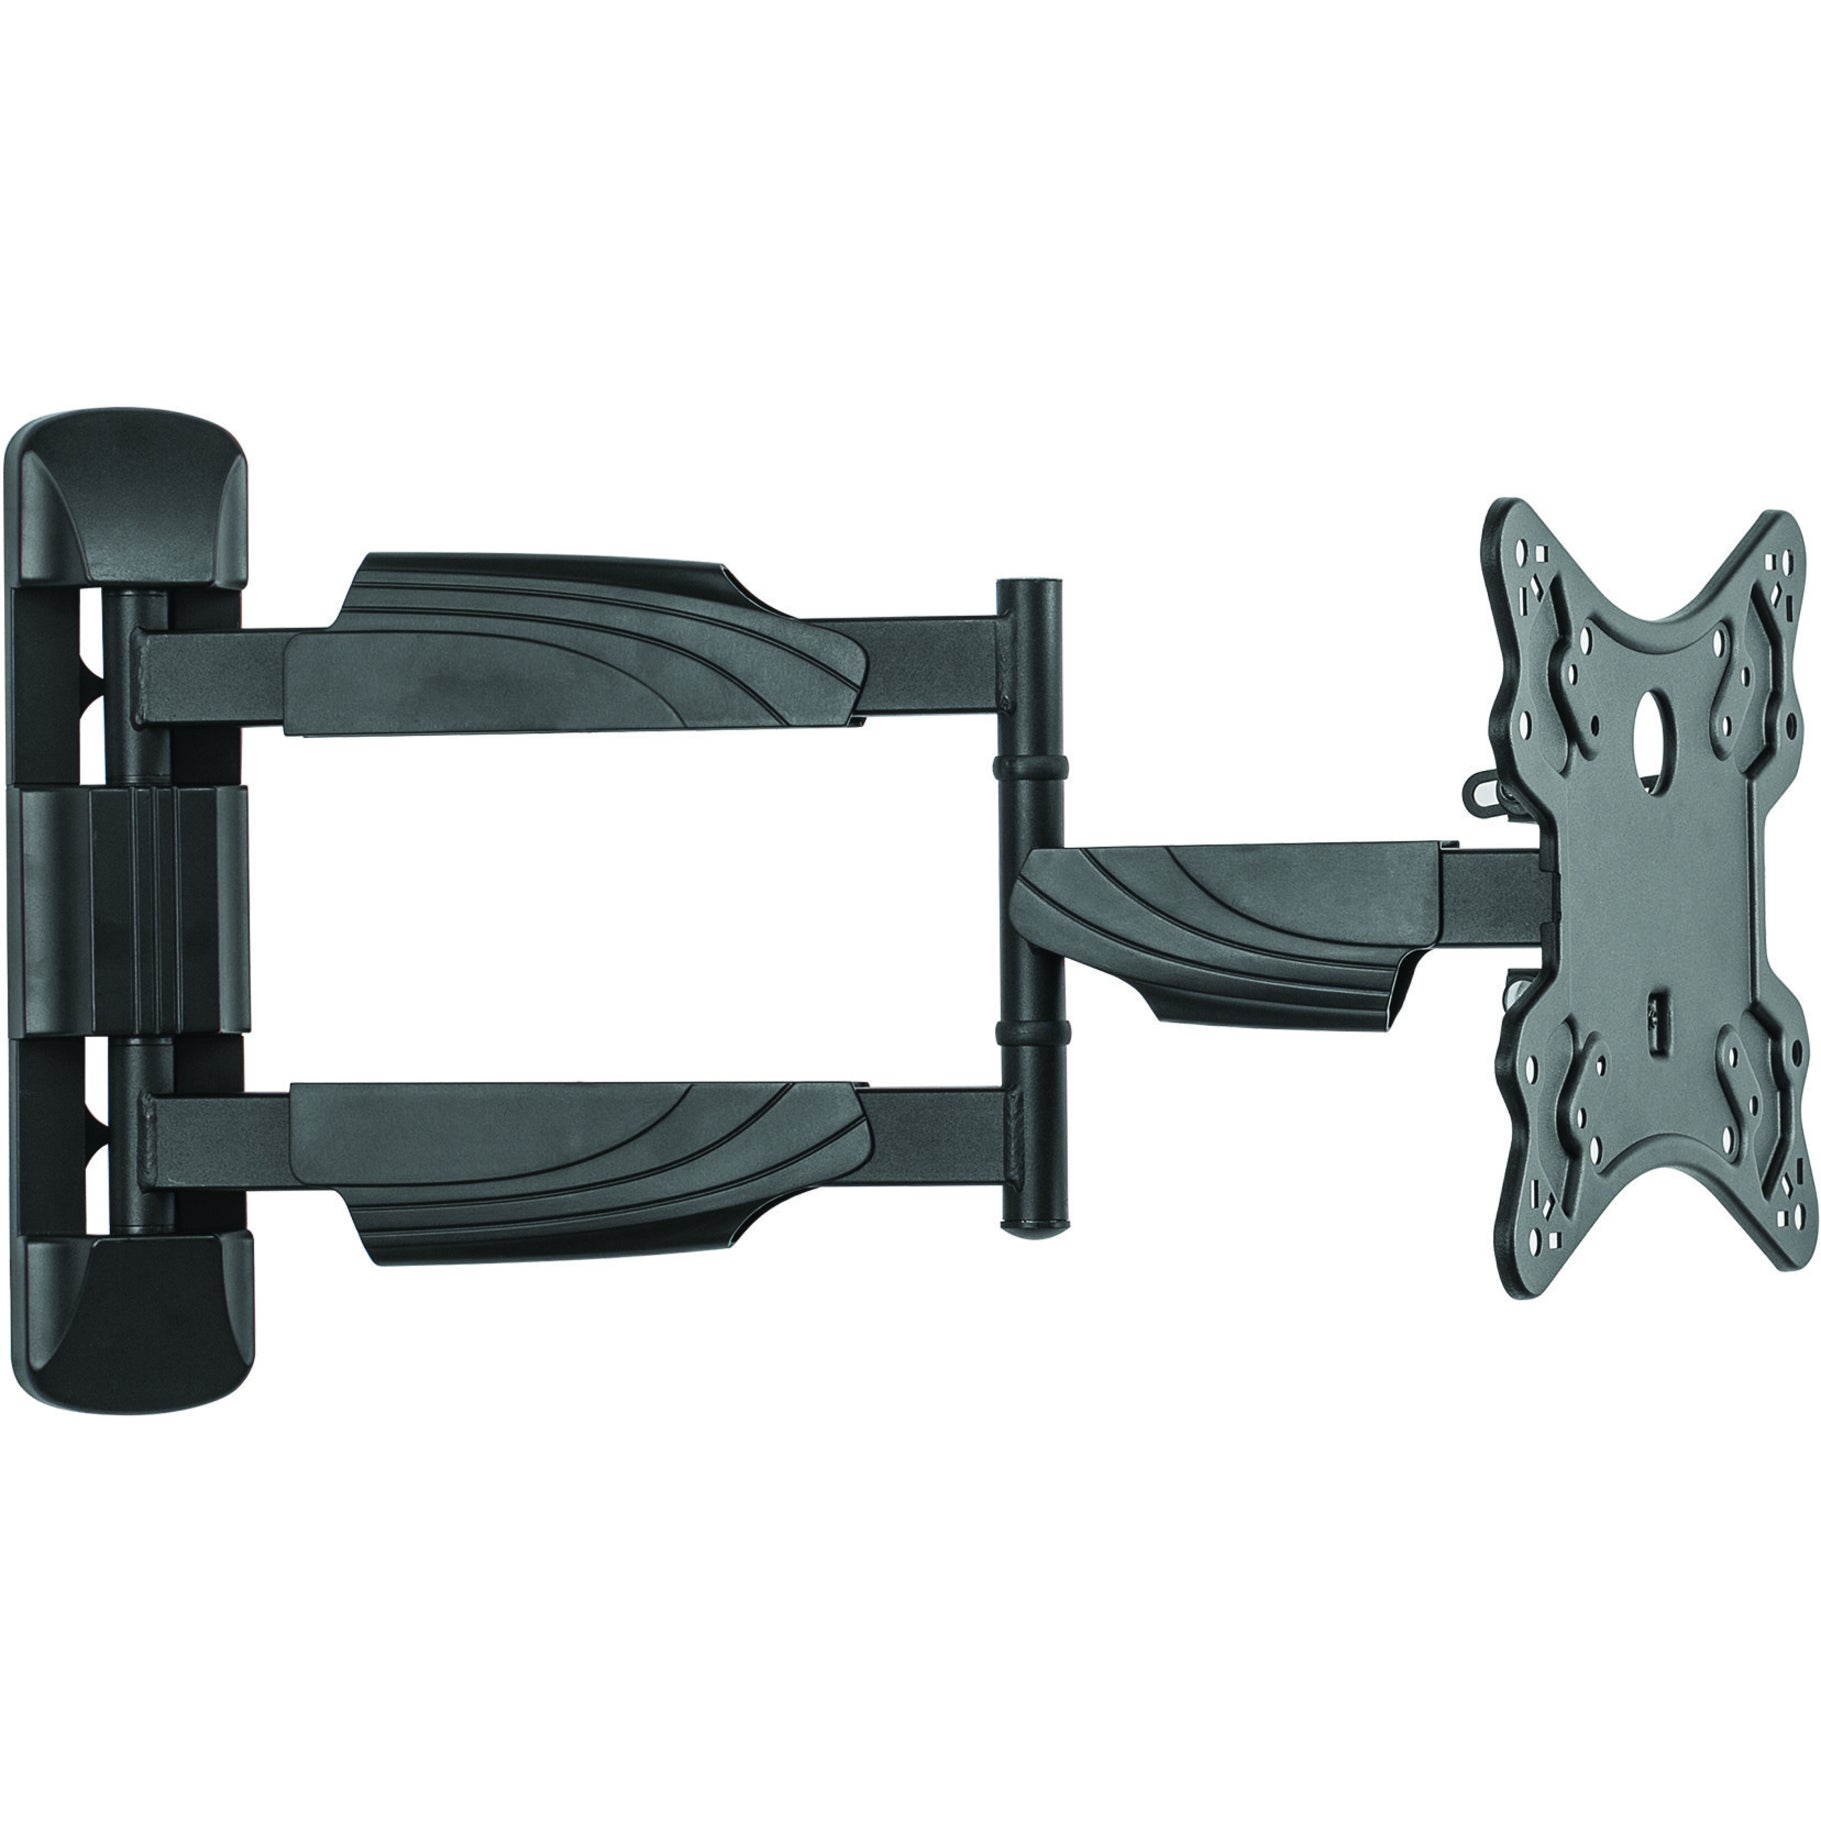 Fellowes 8043601 Full Motion TV Wall Mount, Supports up to 55" Screens, 77 lb Load Capacity